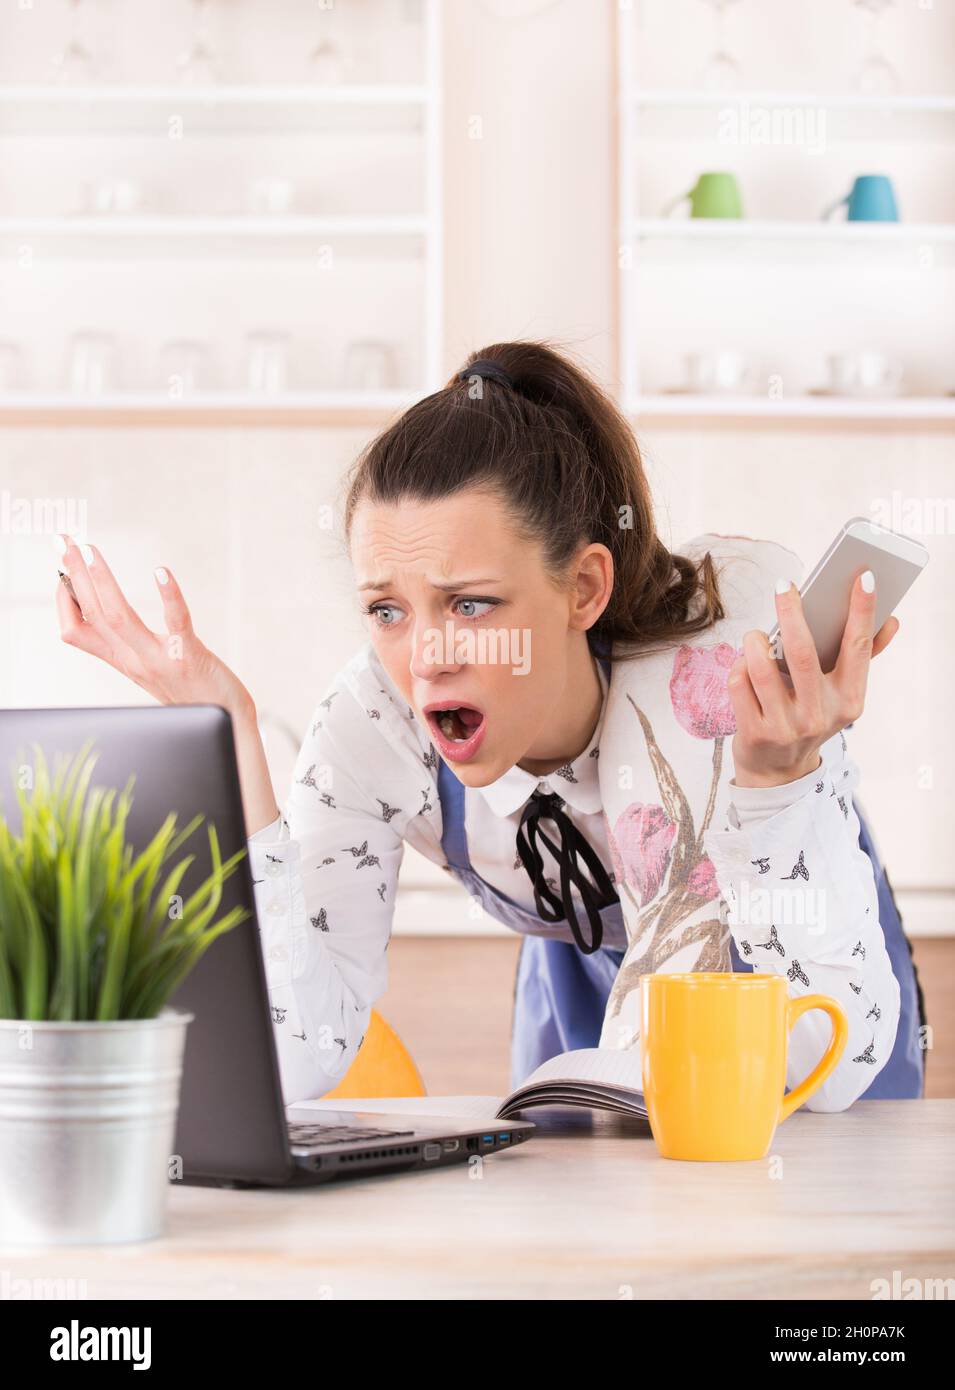 Shocked young woman holding mobile phone and looking at laptop. Busy girl with apron cooking and working from home Stock Photo